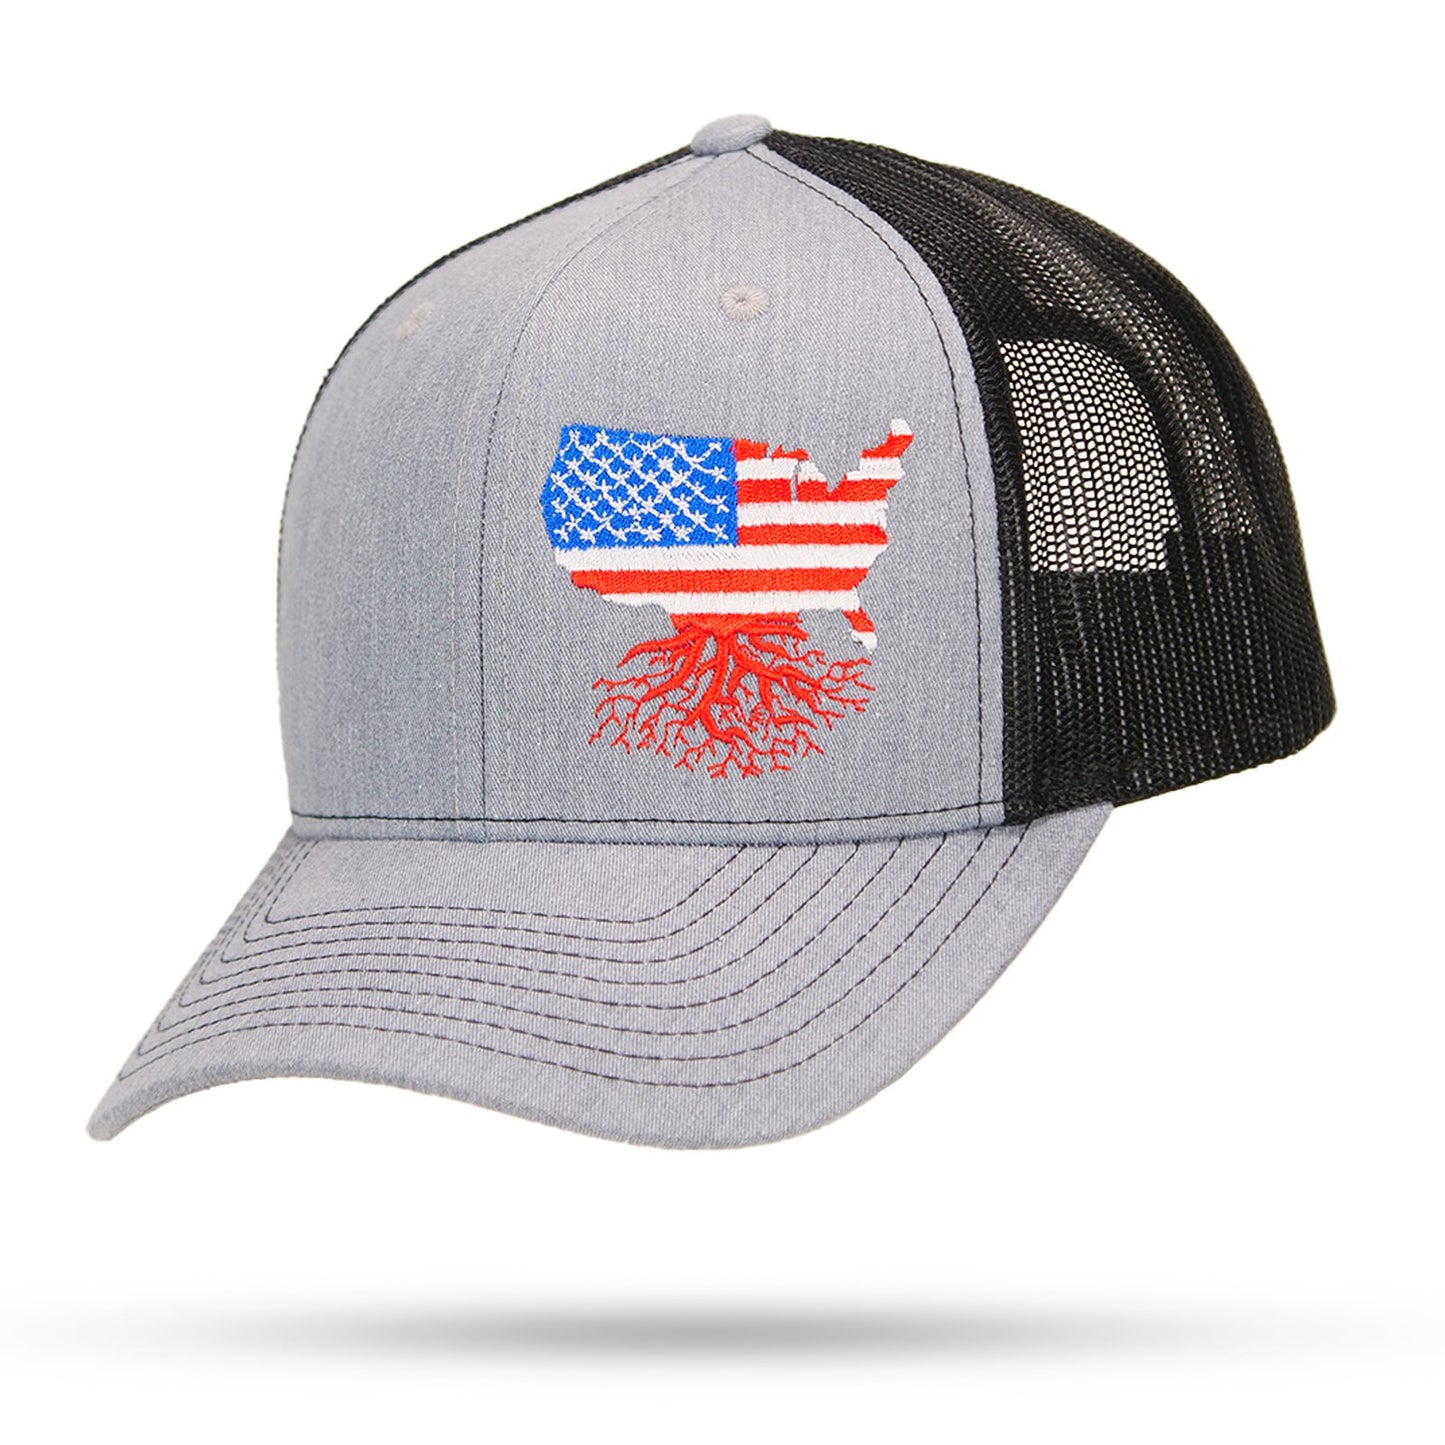 USA Snapback Trucker Hat - Show Your Roots | Comfort & Style Heather with Black Mesh